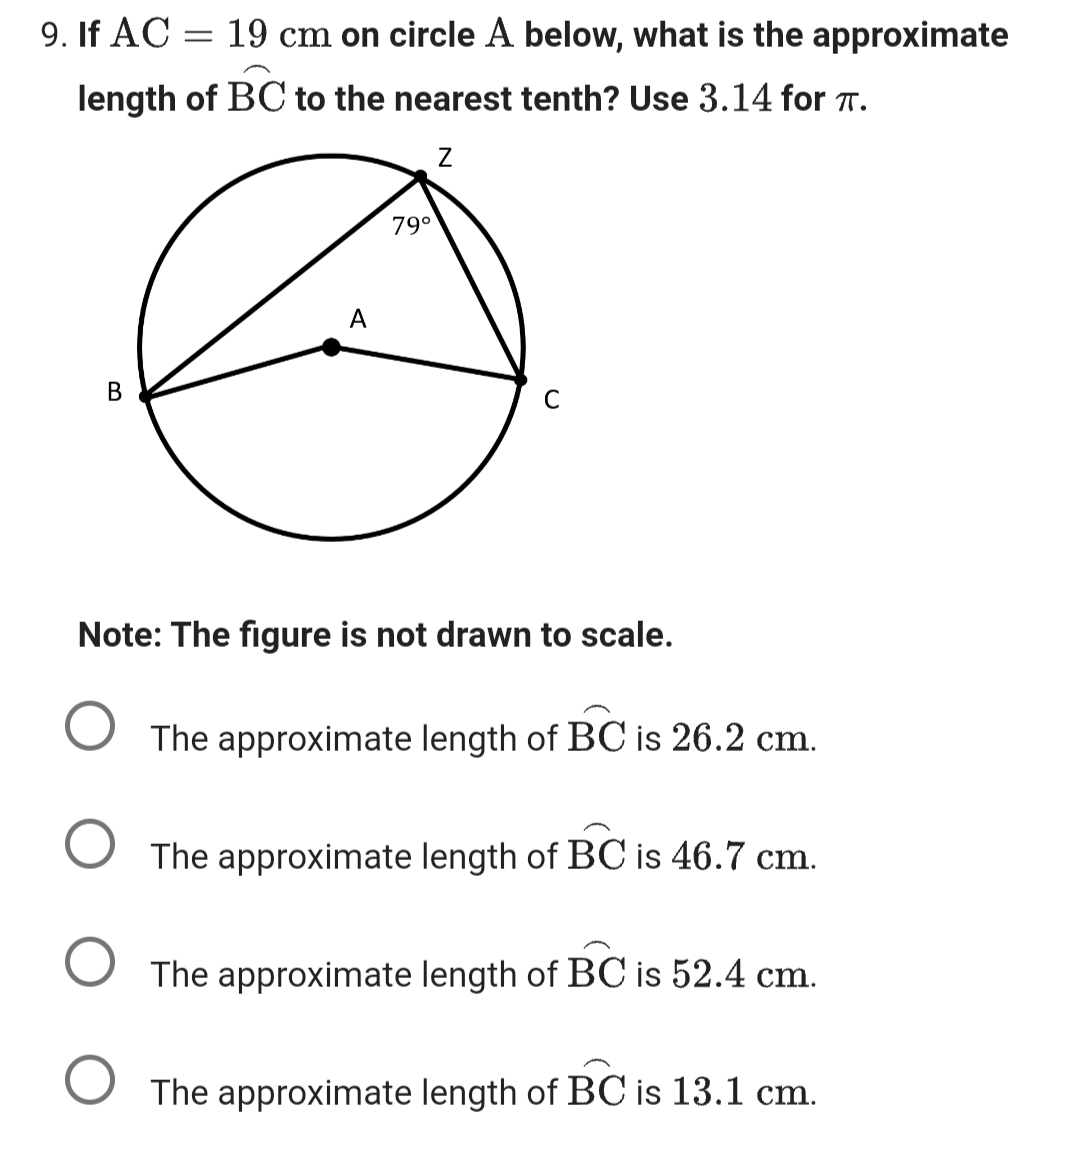 9. If AC
19 cm on circle A below, what is the approximate
length of BC to the nearest tenth? Use 3.14 for TT.
Z
B
A
79⁰
C
Note: The figure is not drawn to scale.
The approximate length of BC is 26.2 cm.
O The approximate length of BC is 46.7 cm.
The approximate length of BC is 52.4 cm.
O The approximate length of BC is 13.1 cm.